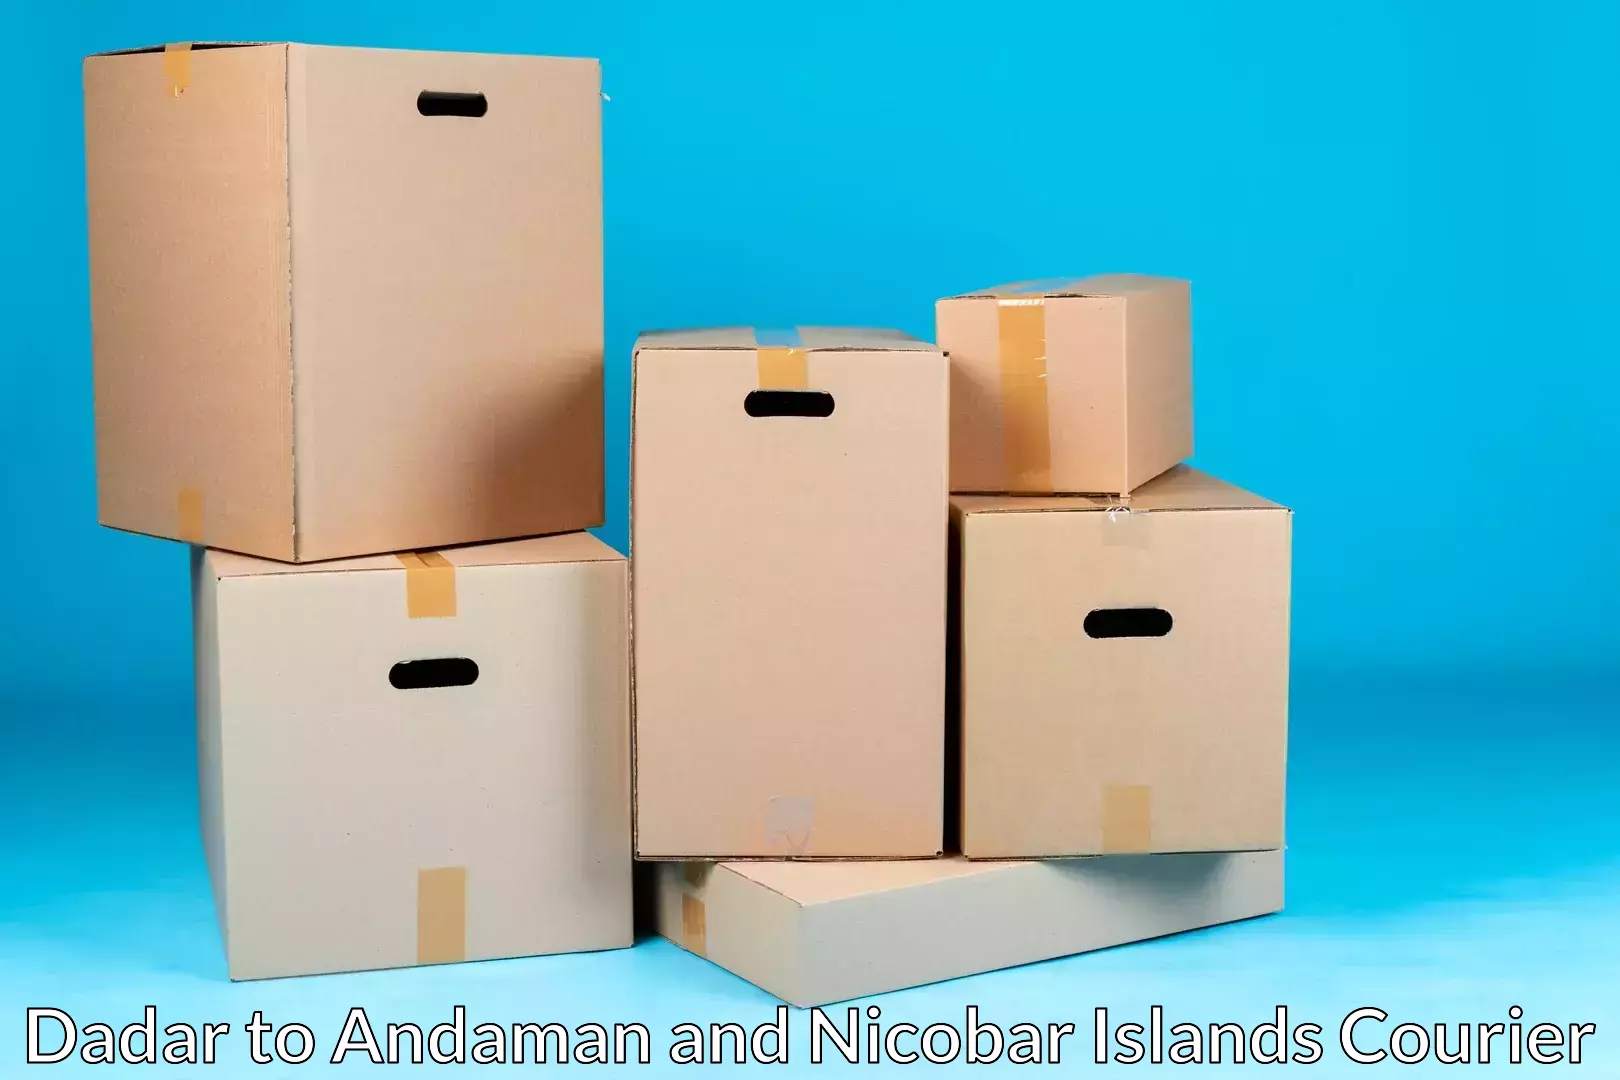 Professional movers in Dadar to Port Blair